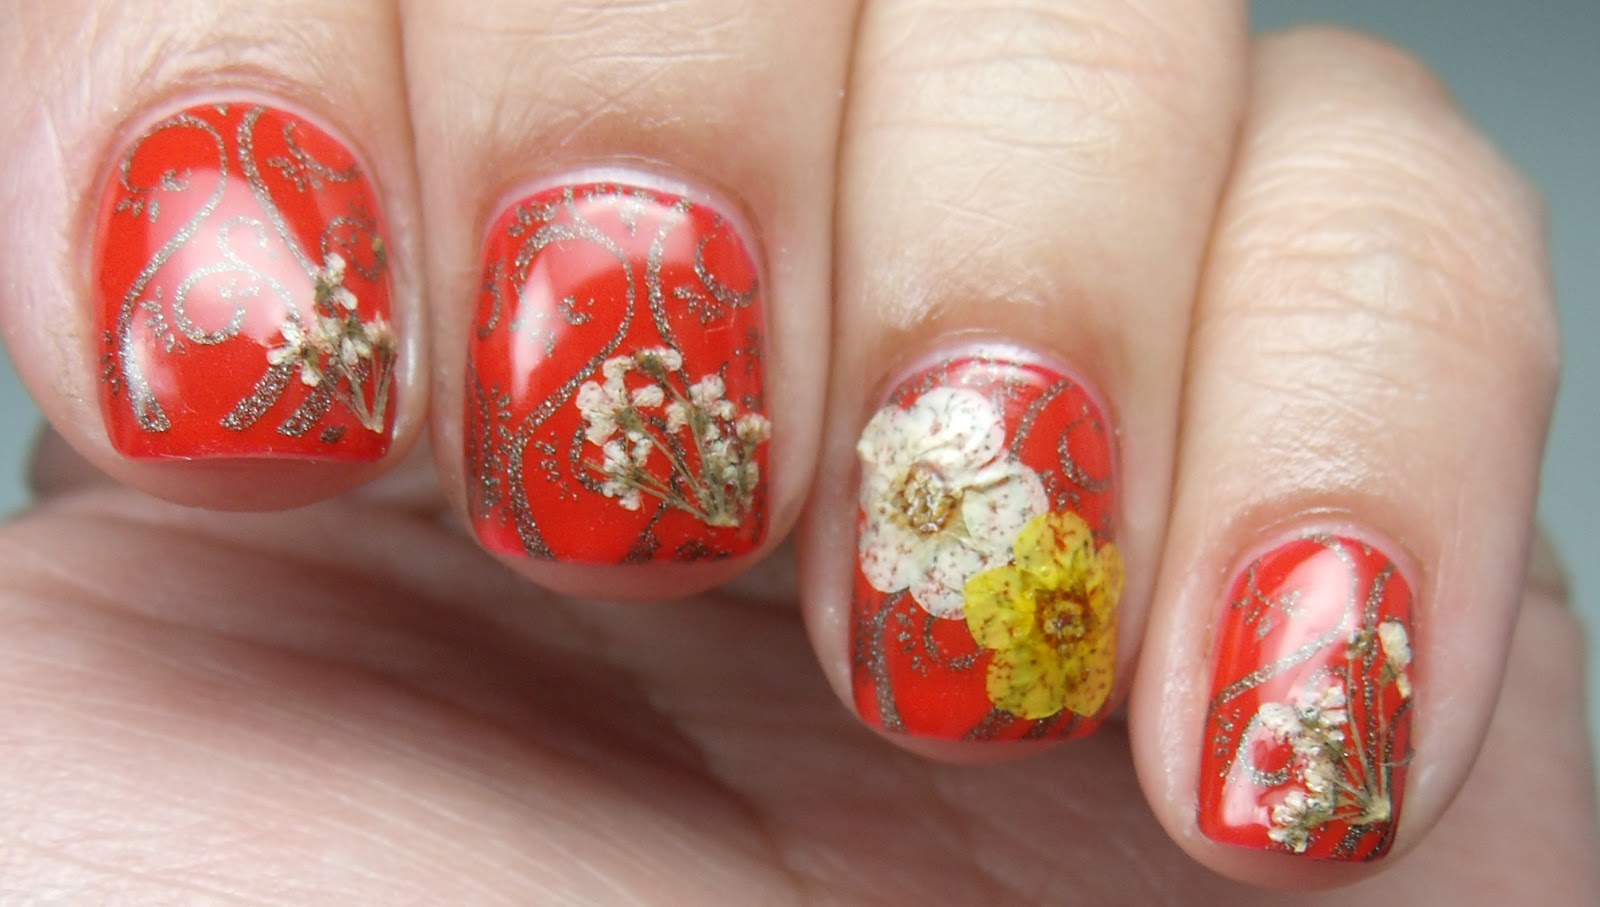 7. How to Preserve Dried Flowers for Nail Art - wide 8